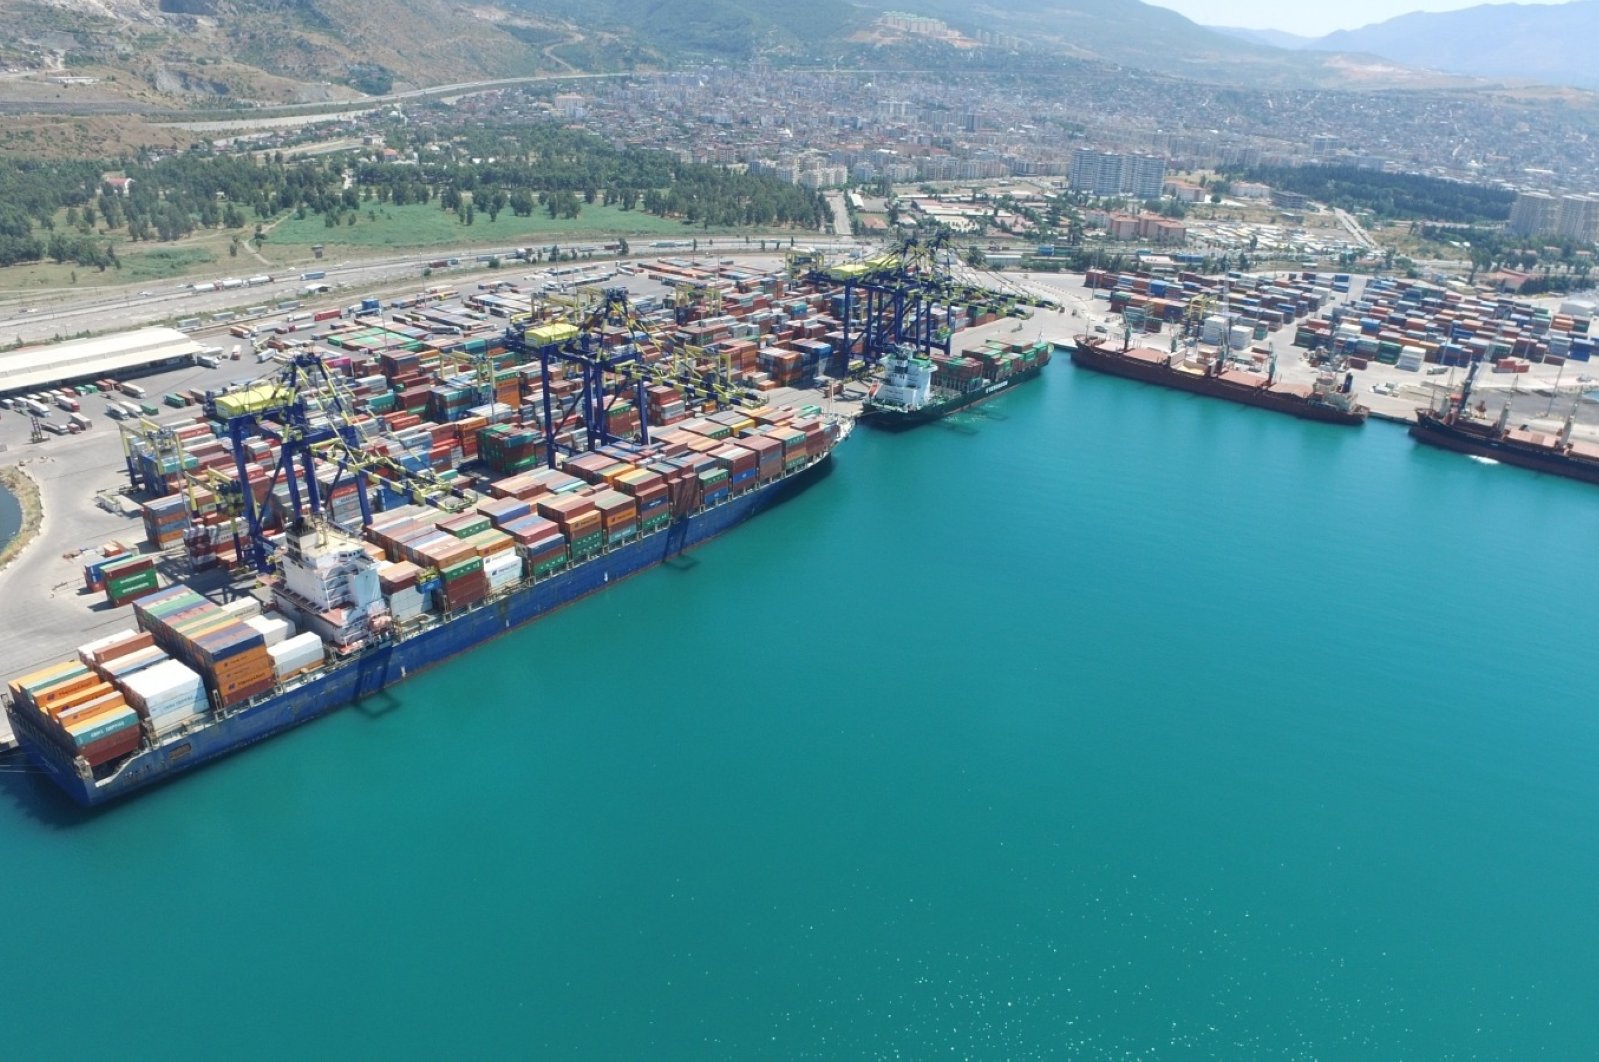 A general view of LimakPort Iskenderun International Port in southern Hatay province, Turkey, Aug. 12, 2020. (Photo by LimakPort via AA)